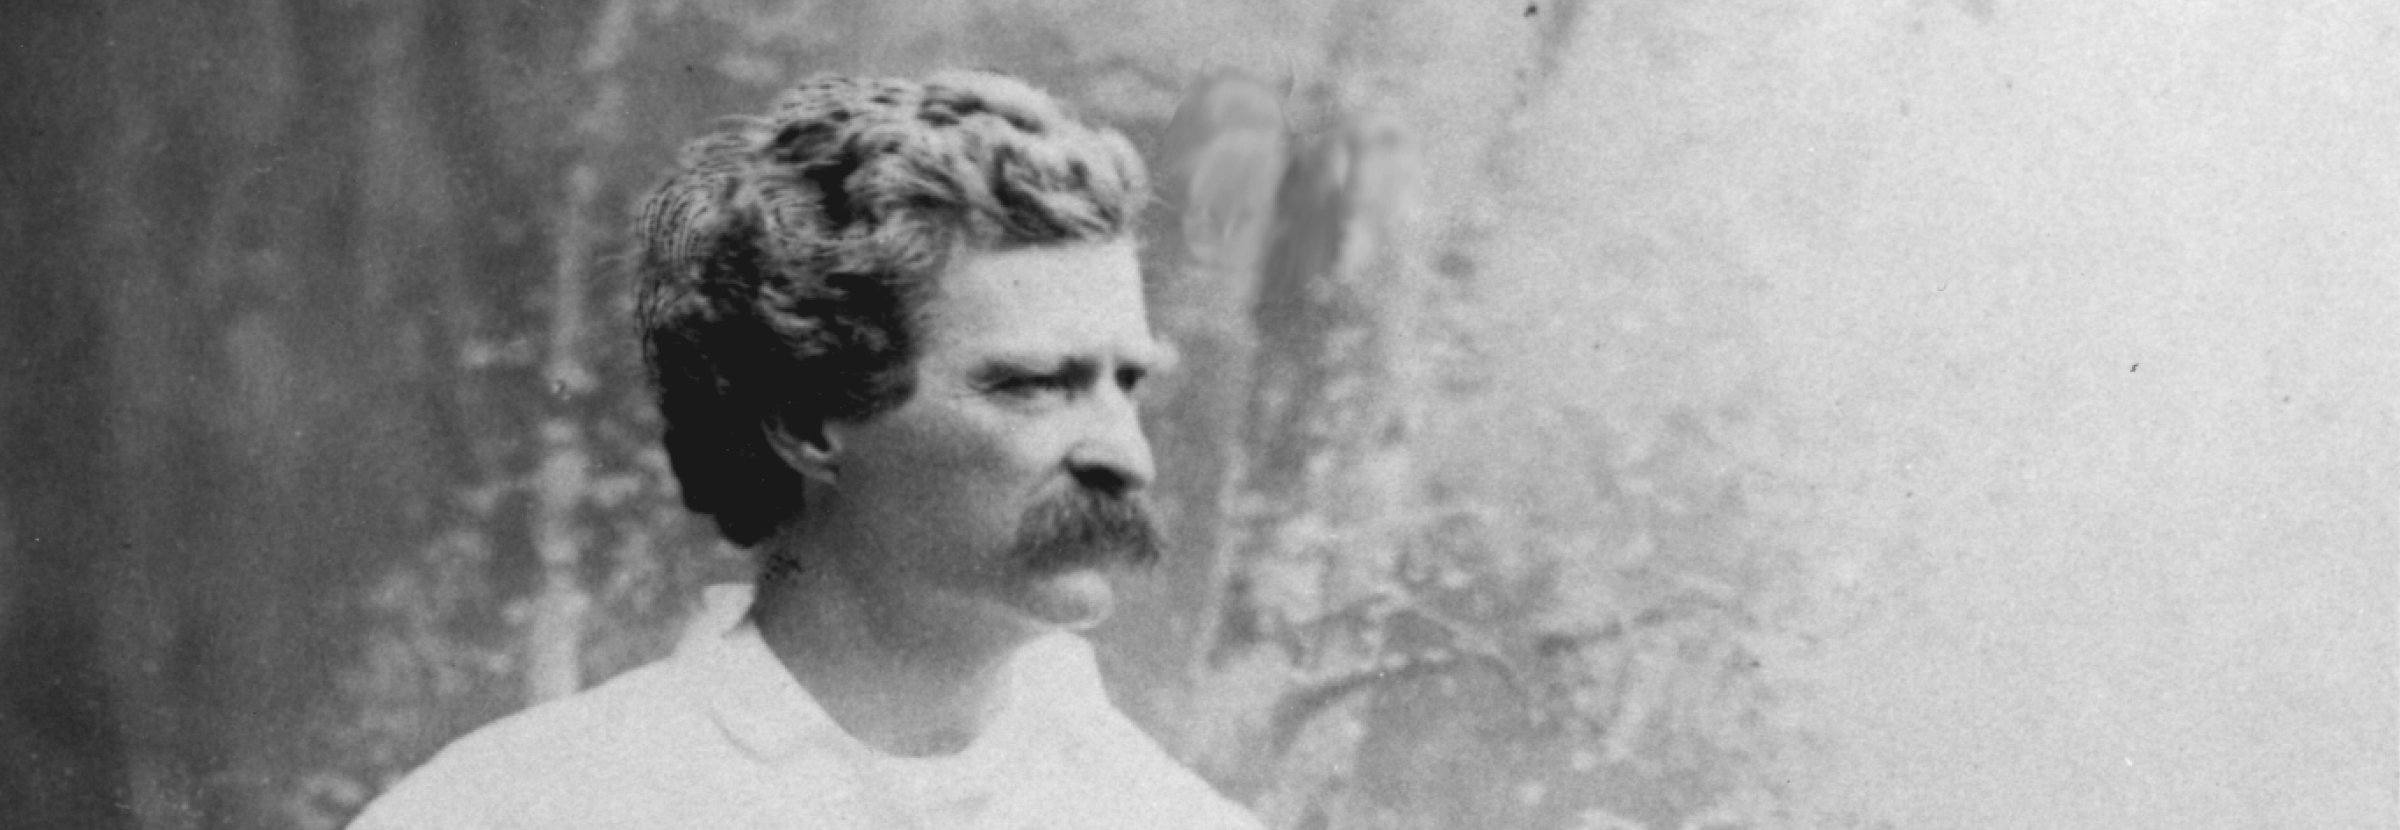 Black and white photo of Mark Twain with a copious mustache and white shirt looking off to the side